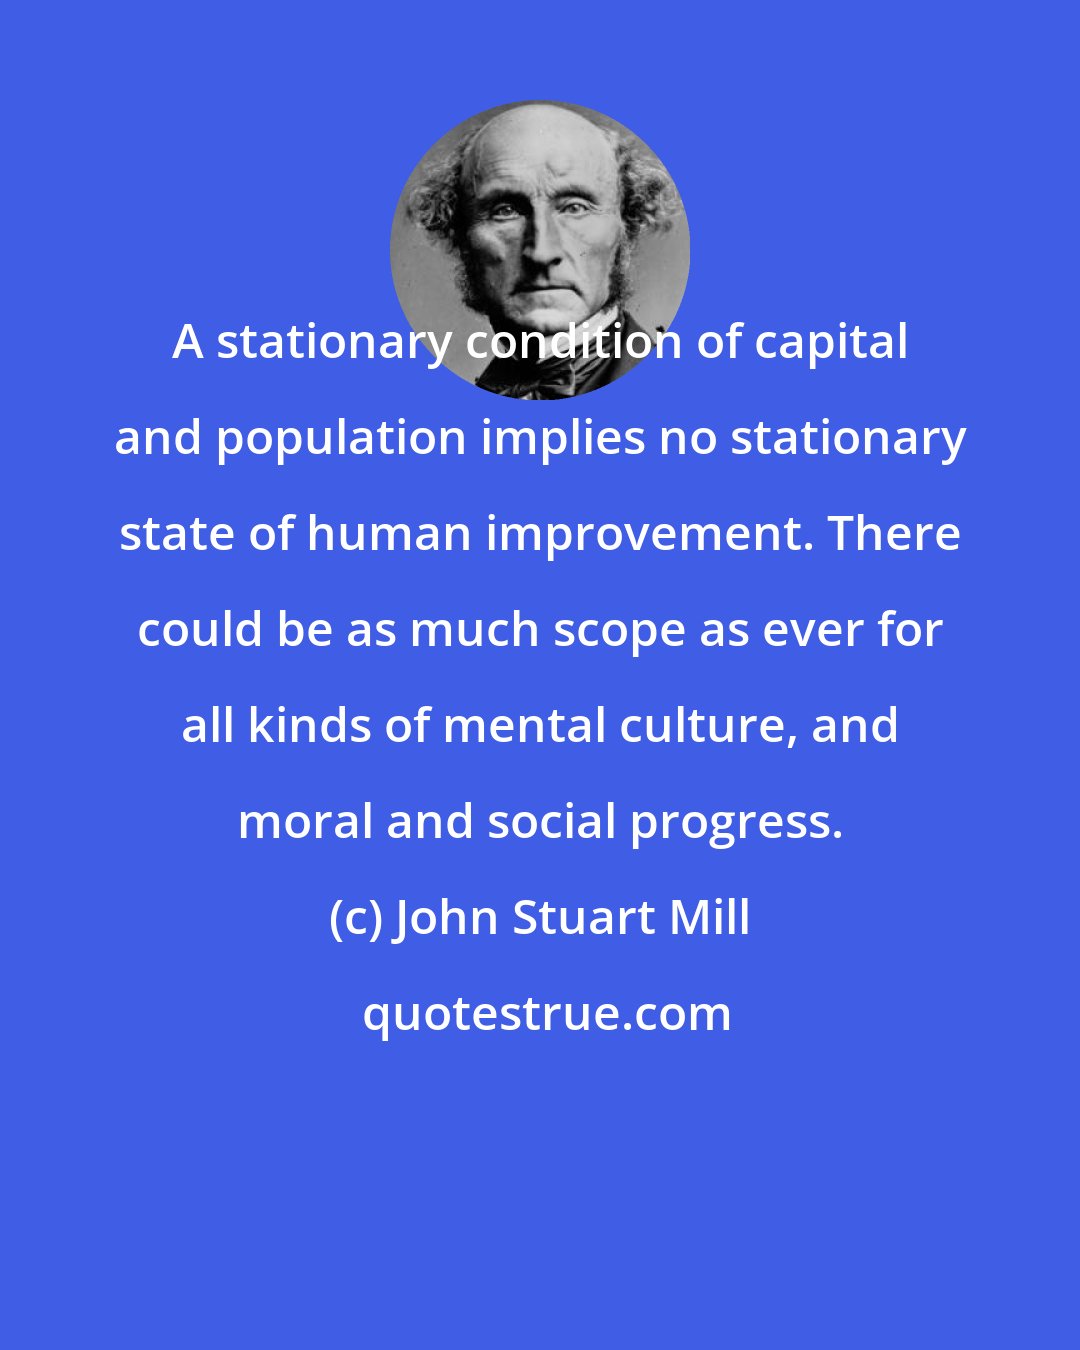 John Stuart Mill: A stationary condition of capital and population implies no stationary state of human improvement. There could be as much scope as ever for all kinds of mental culture, and moral and social progress.